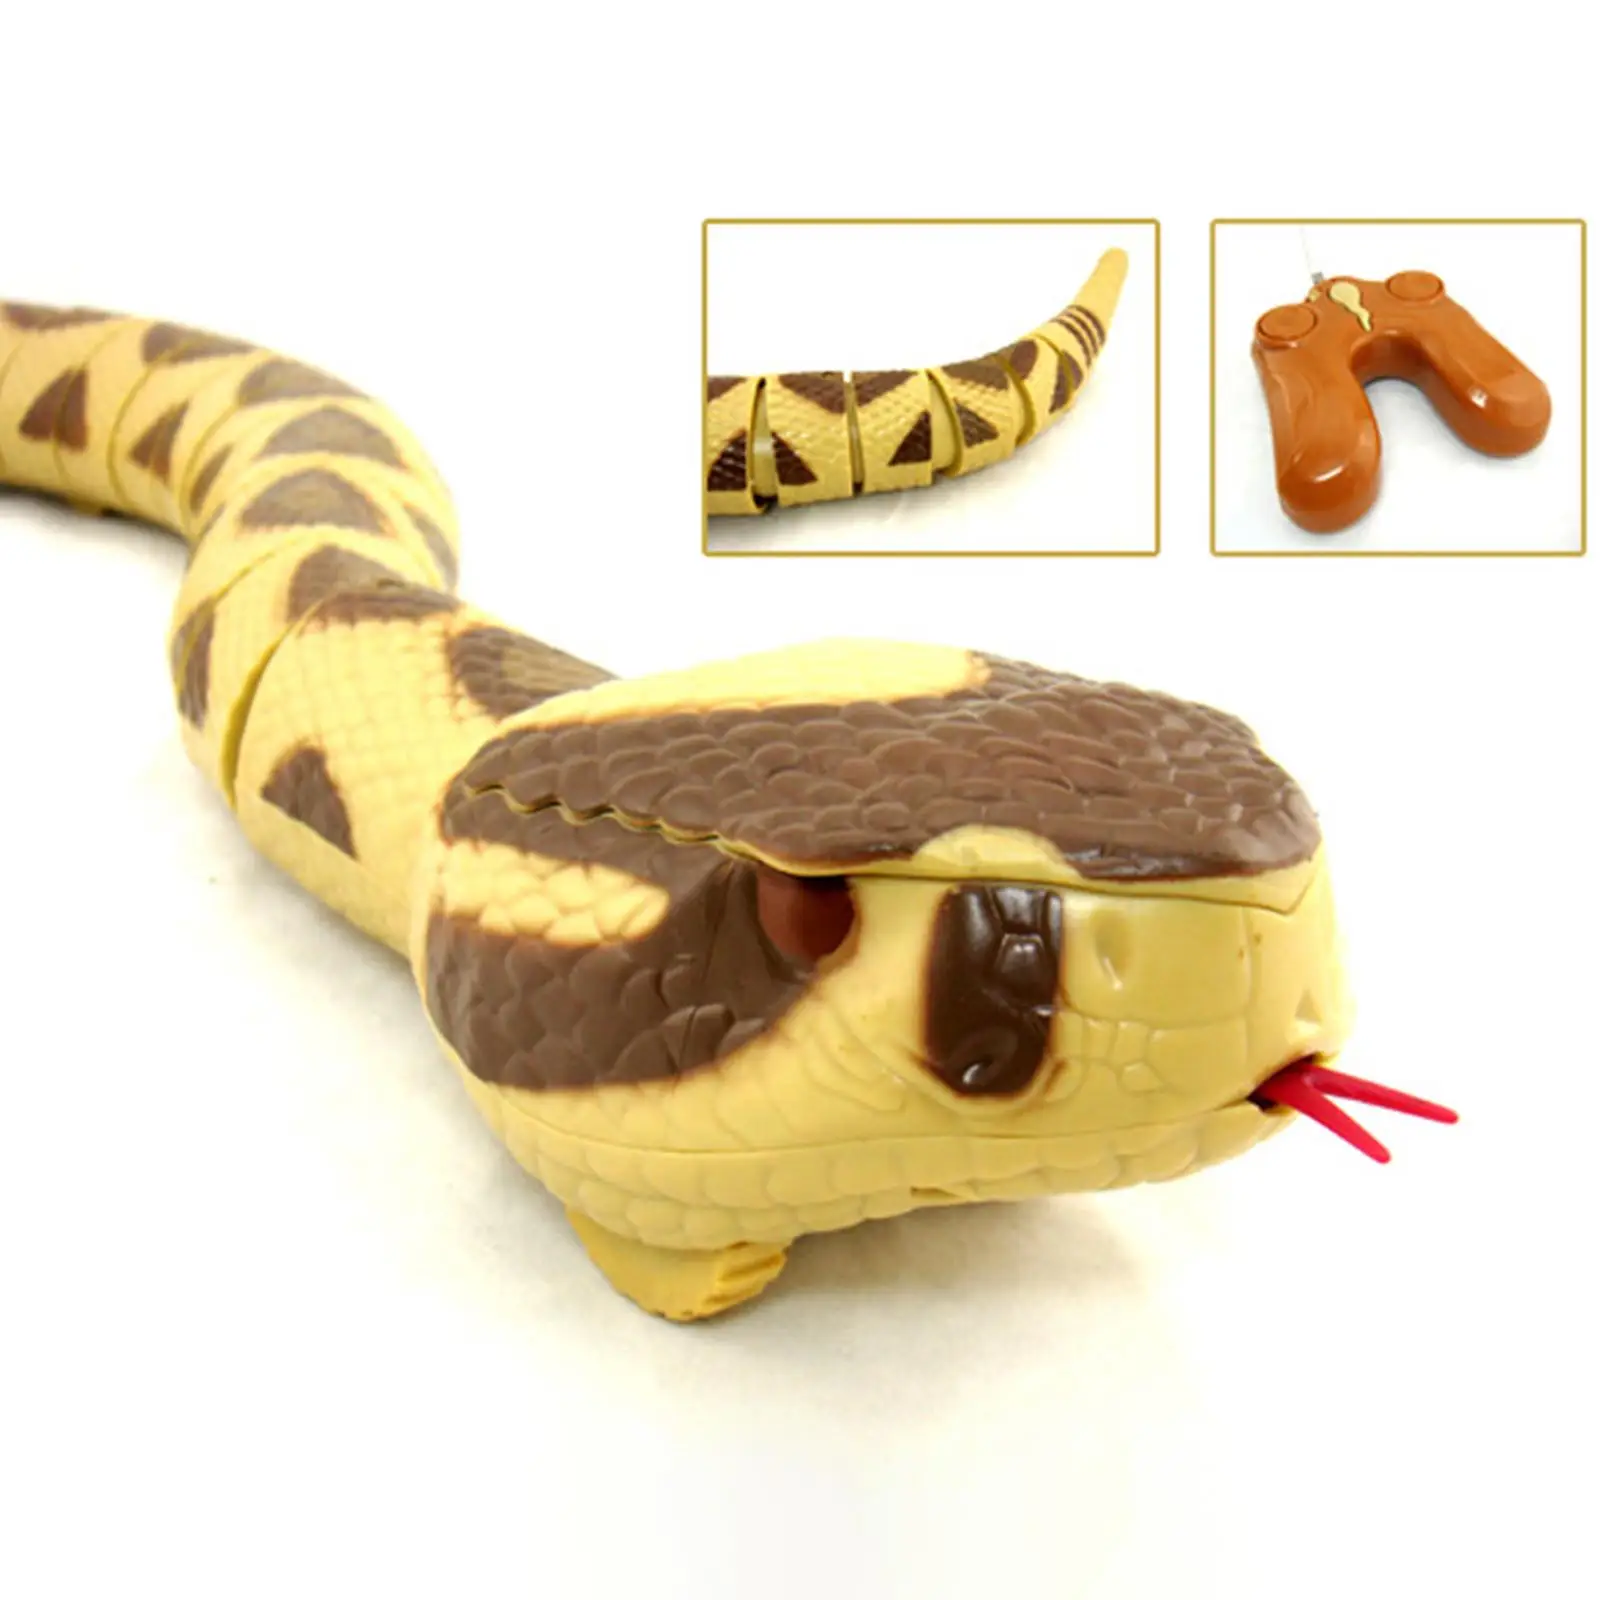 Lifelike RC Snake Toys Scary Snake Toy Artifical Snake Model Party Favors for Party Tricks Jokes Prop Holiday Gifts